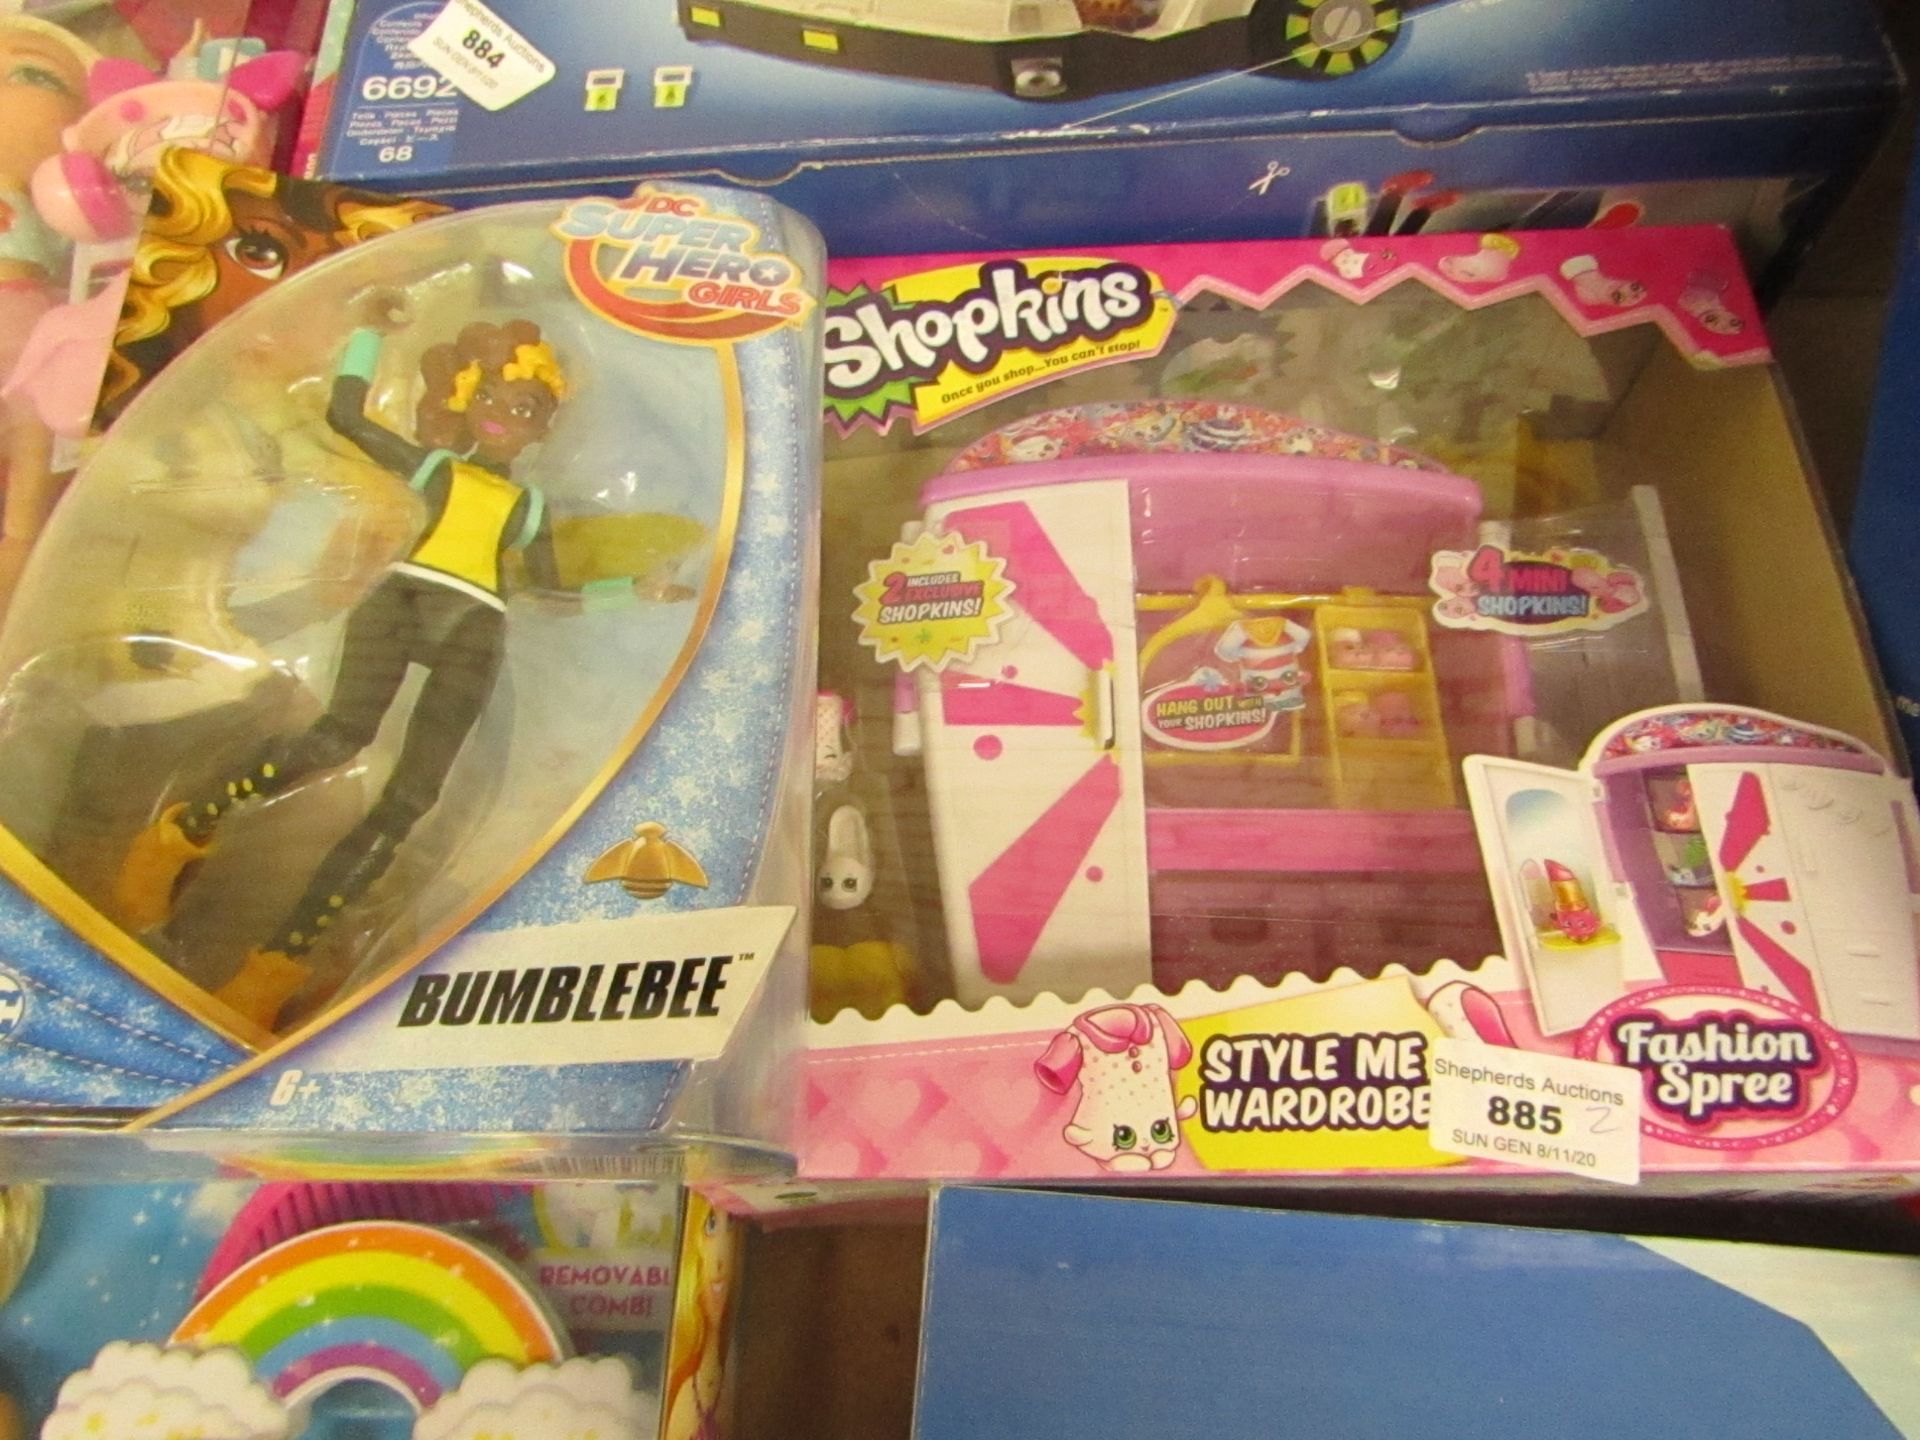 2 Items Being a Shopkins Style Me wardrobe (new) & a Super hero Girls Bumblebee Figure.